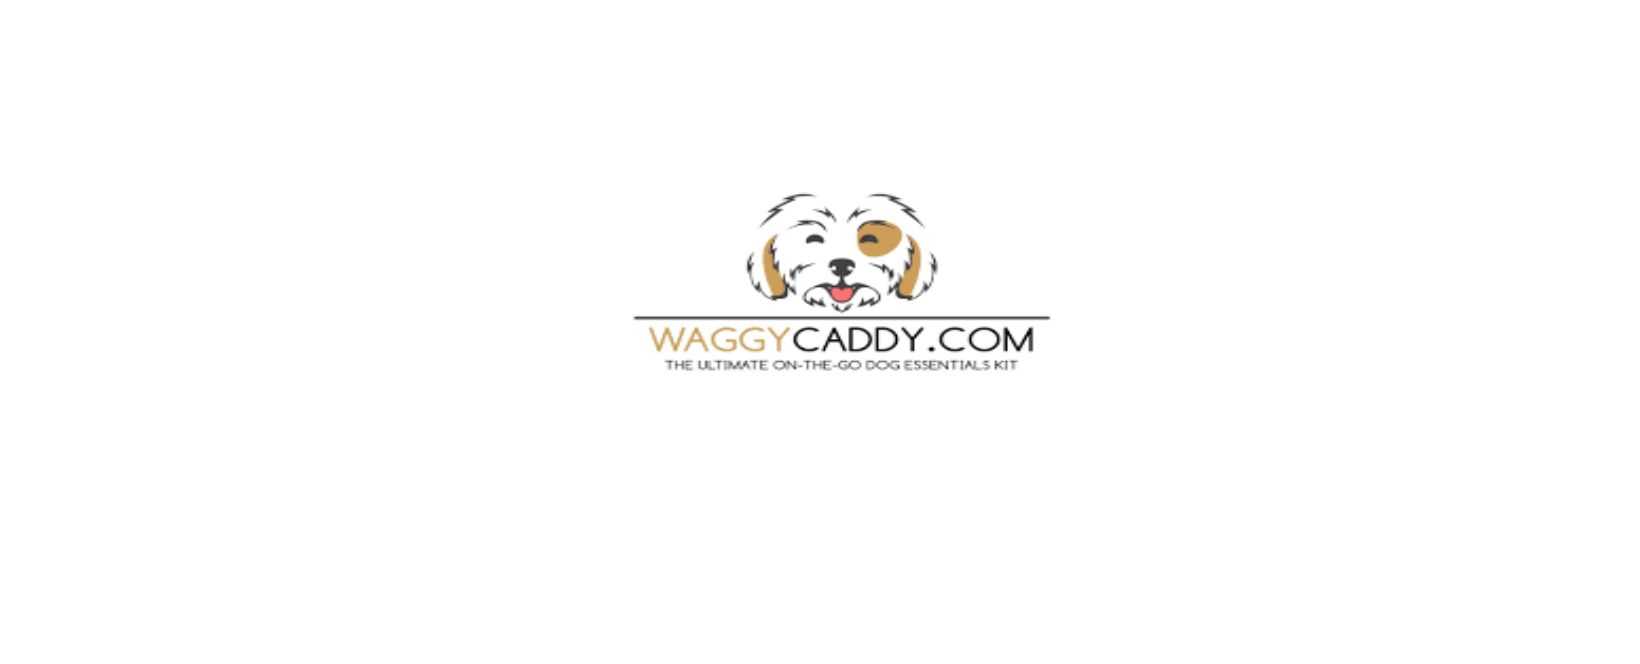 WaggyCaddy Discount Code 2022